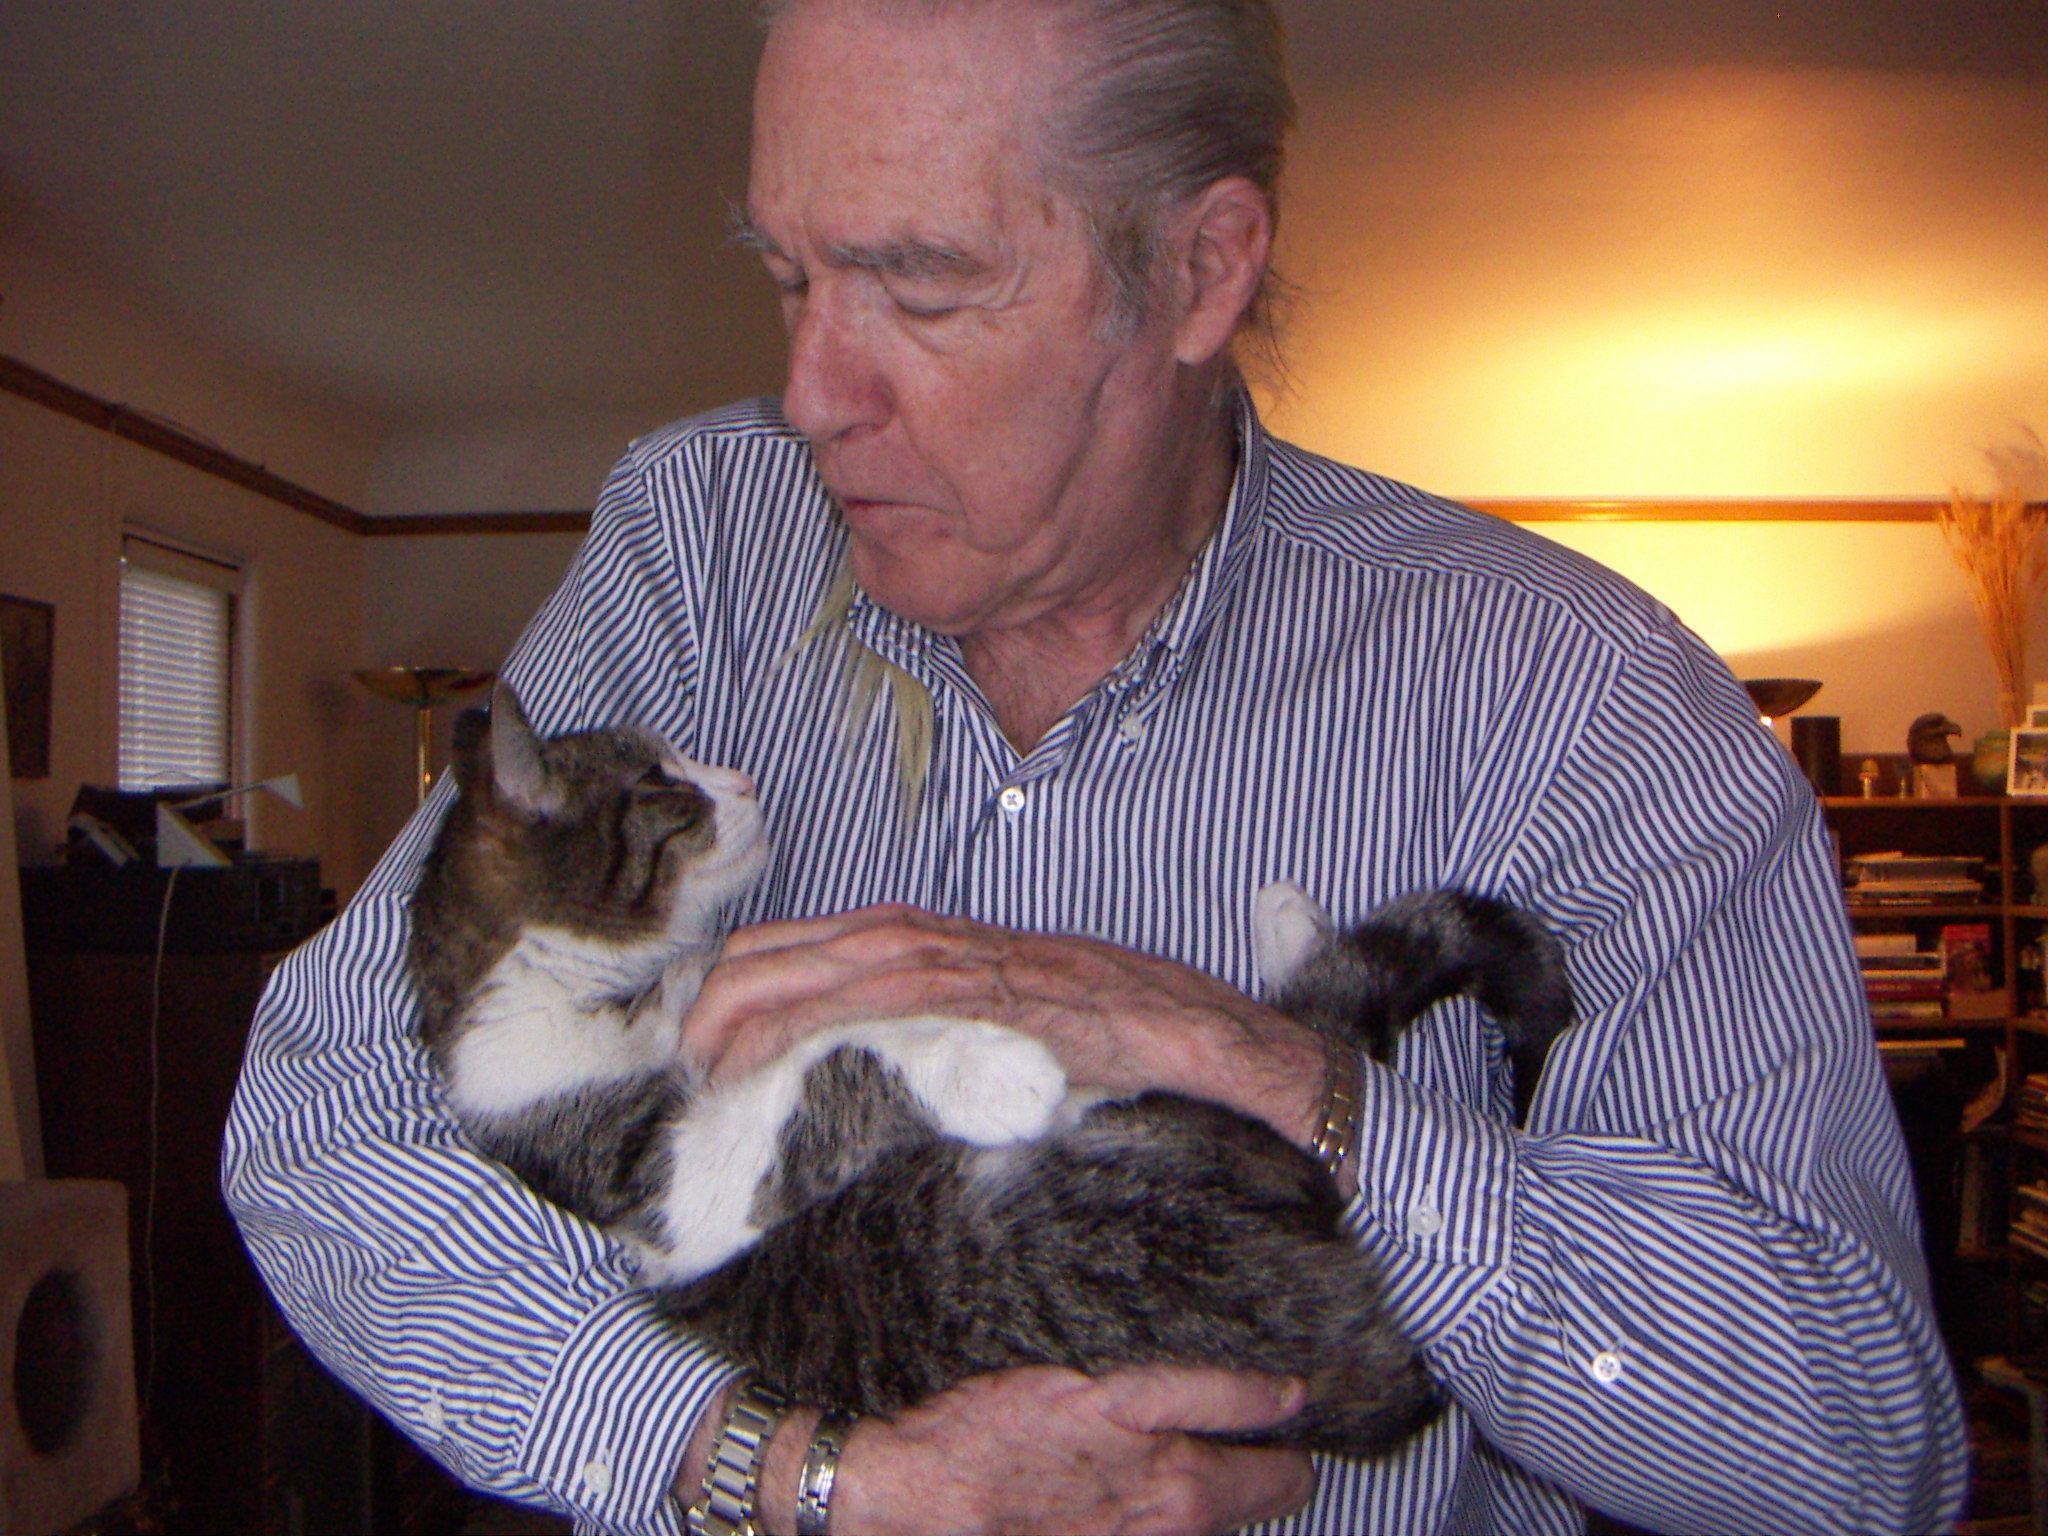 With his Cat Willie